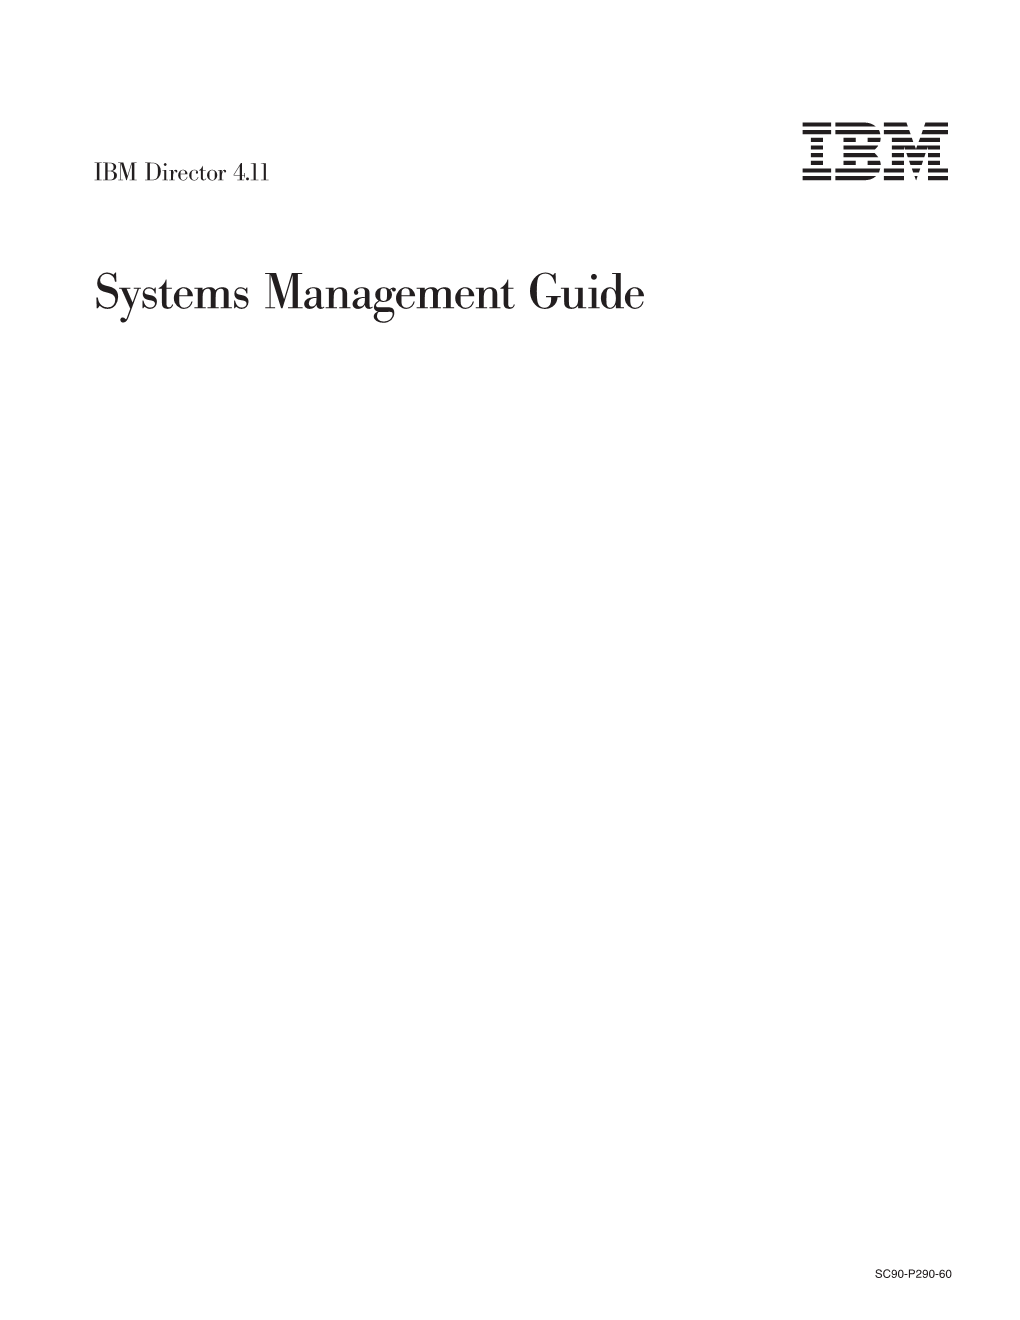 IBM Director 4.11: Systems Management Guide Starting the Management Processor Assistant Task